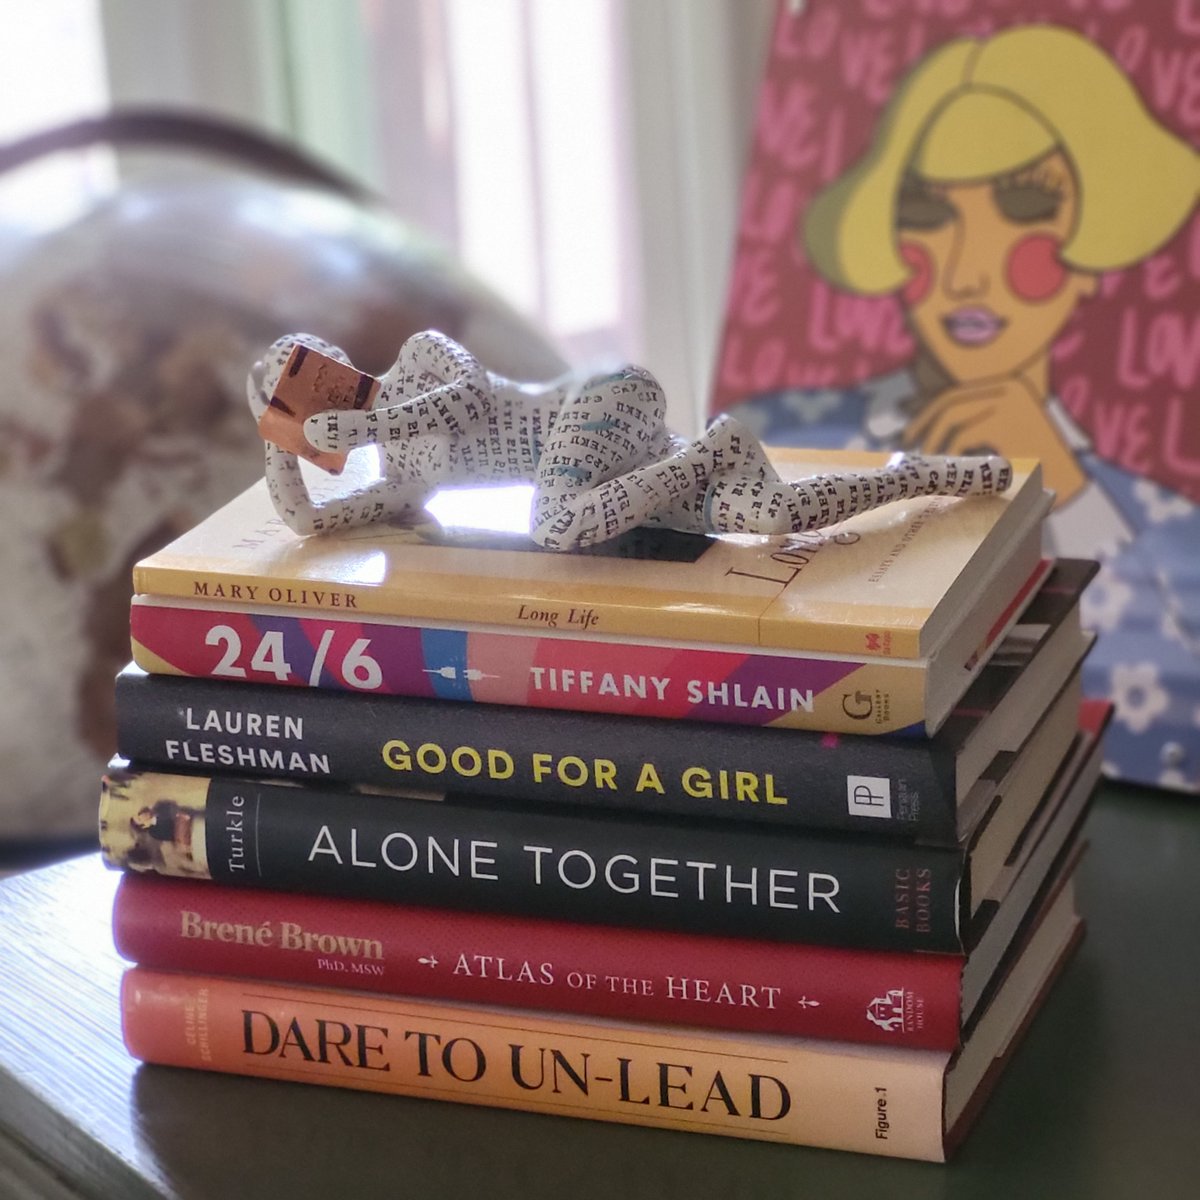 May reading list includes some poetry, some sociology, and leadership: 
Mary Oliver ~ Long Life
@tiffanyshlain's #TwentyFourSix Life
@STurkle s Alone Together
@BreneBrown s Atlas of the Heart
@CelineSchill's Dare to Un-Lead 

What are you reading ? #ReadToLead  #daretounlead